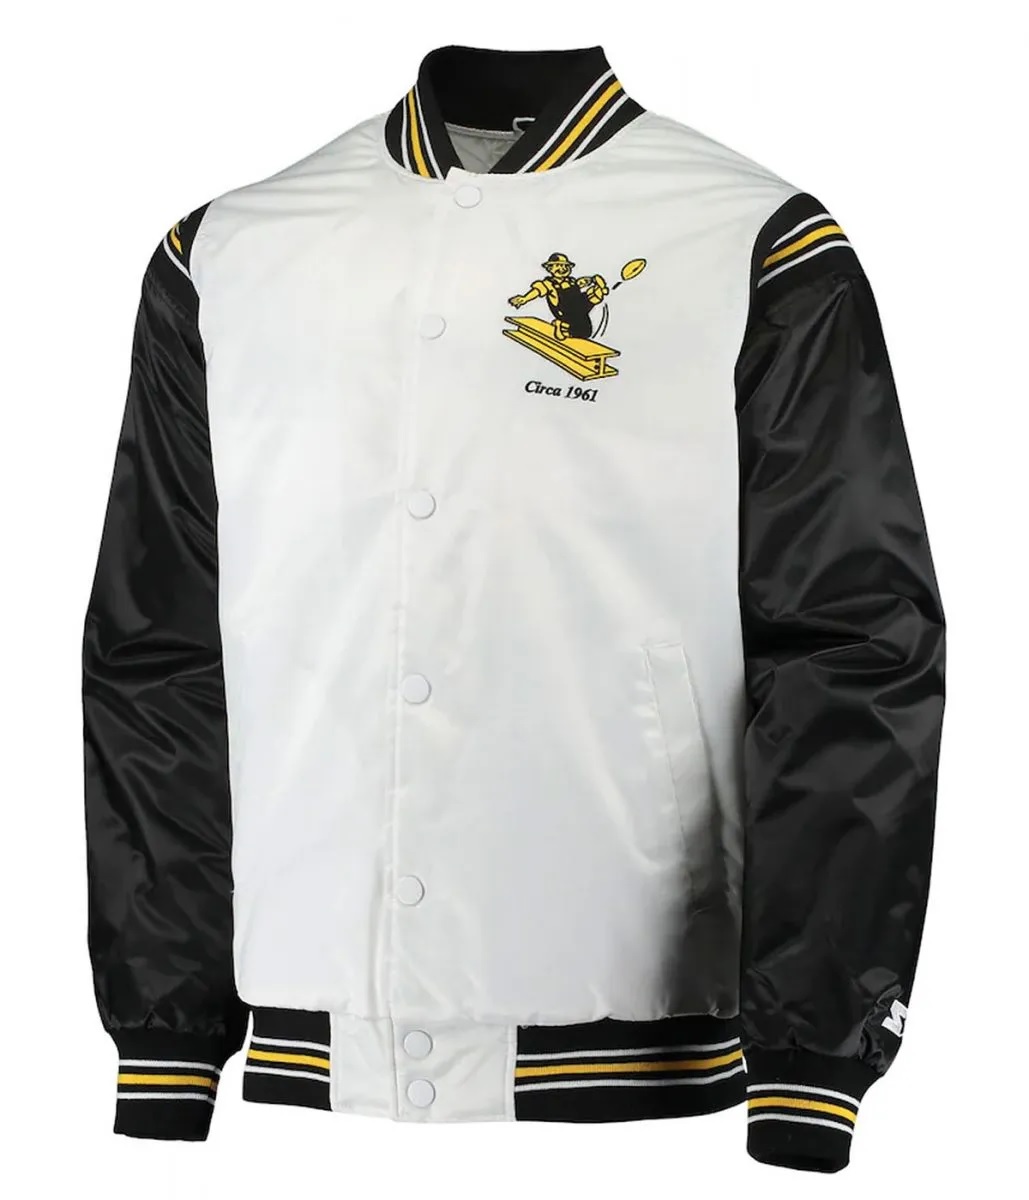 Pittsburgh Steelers Historic Renegade White and Black Jacket